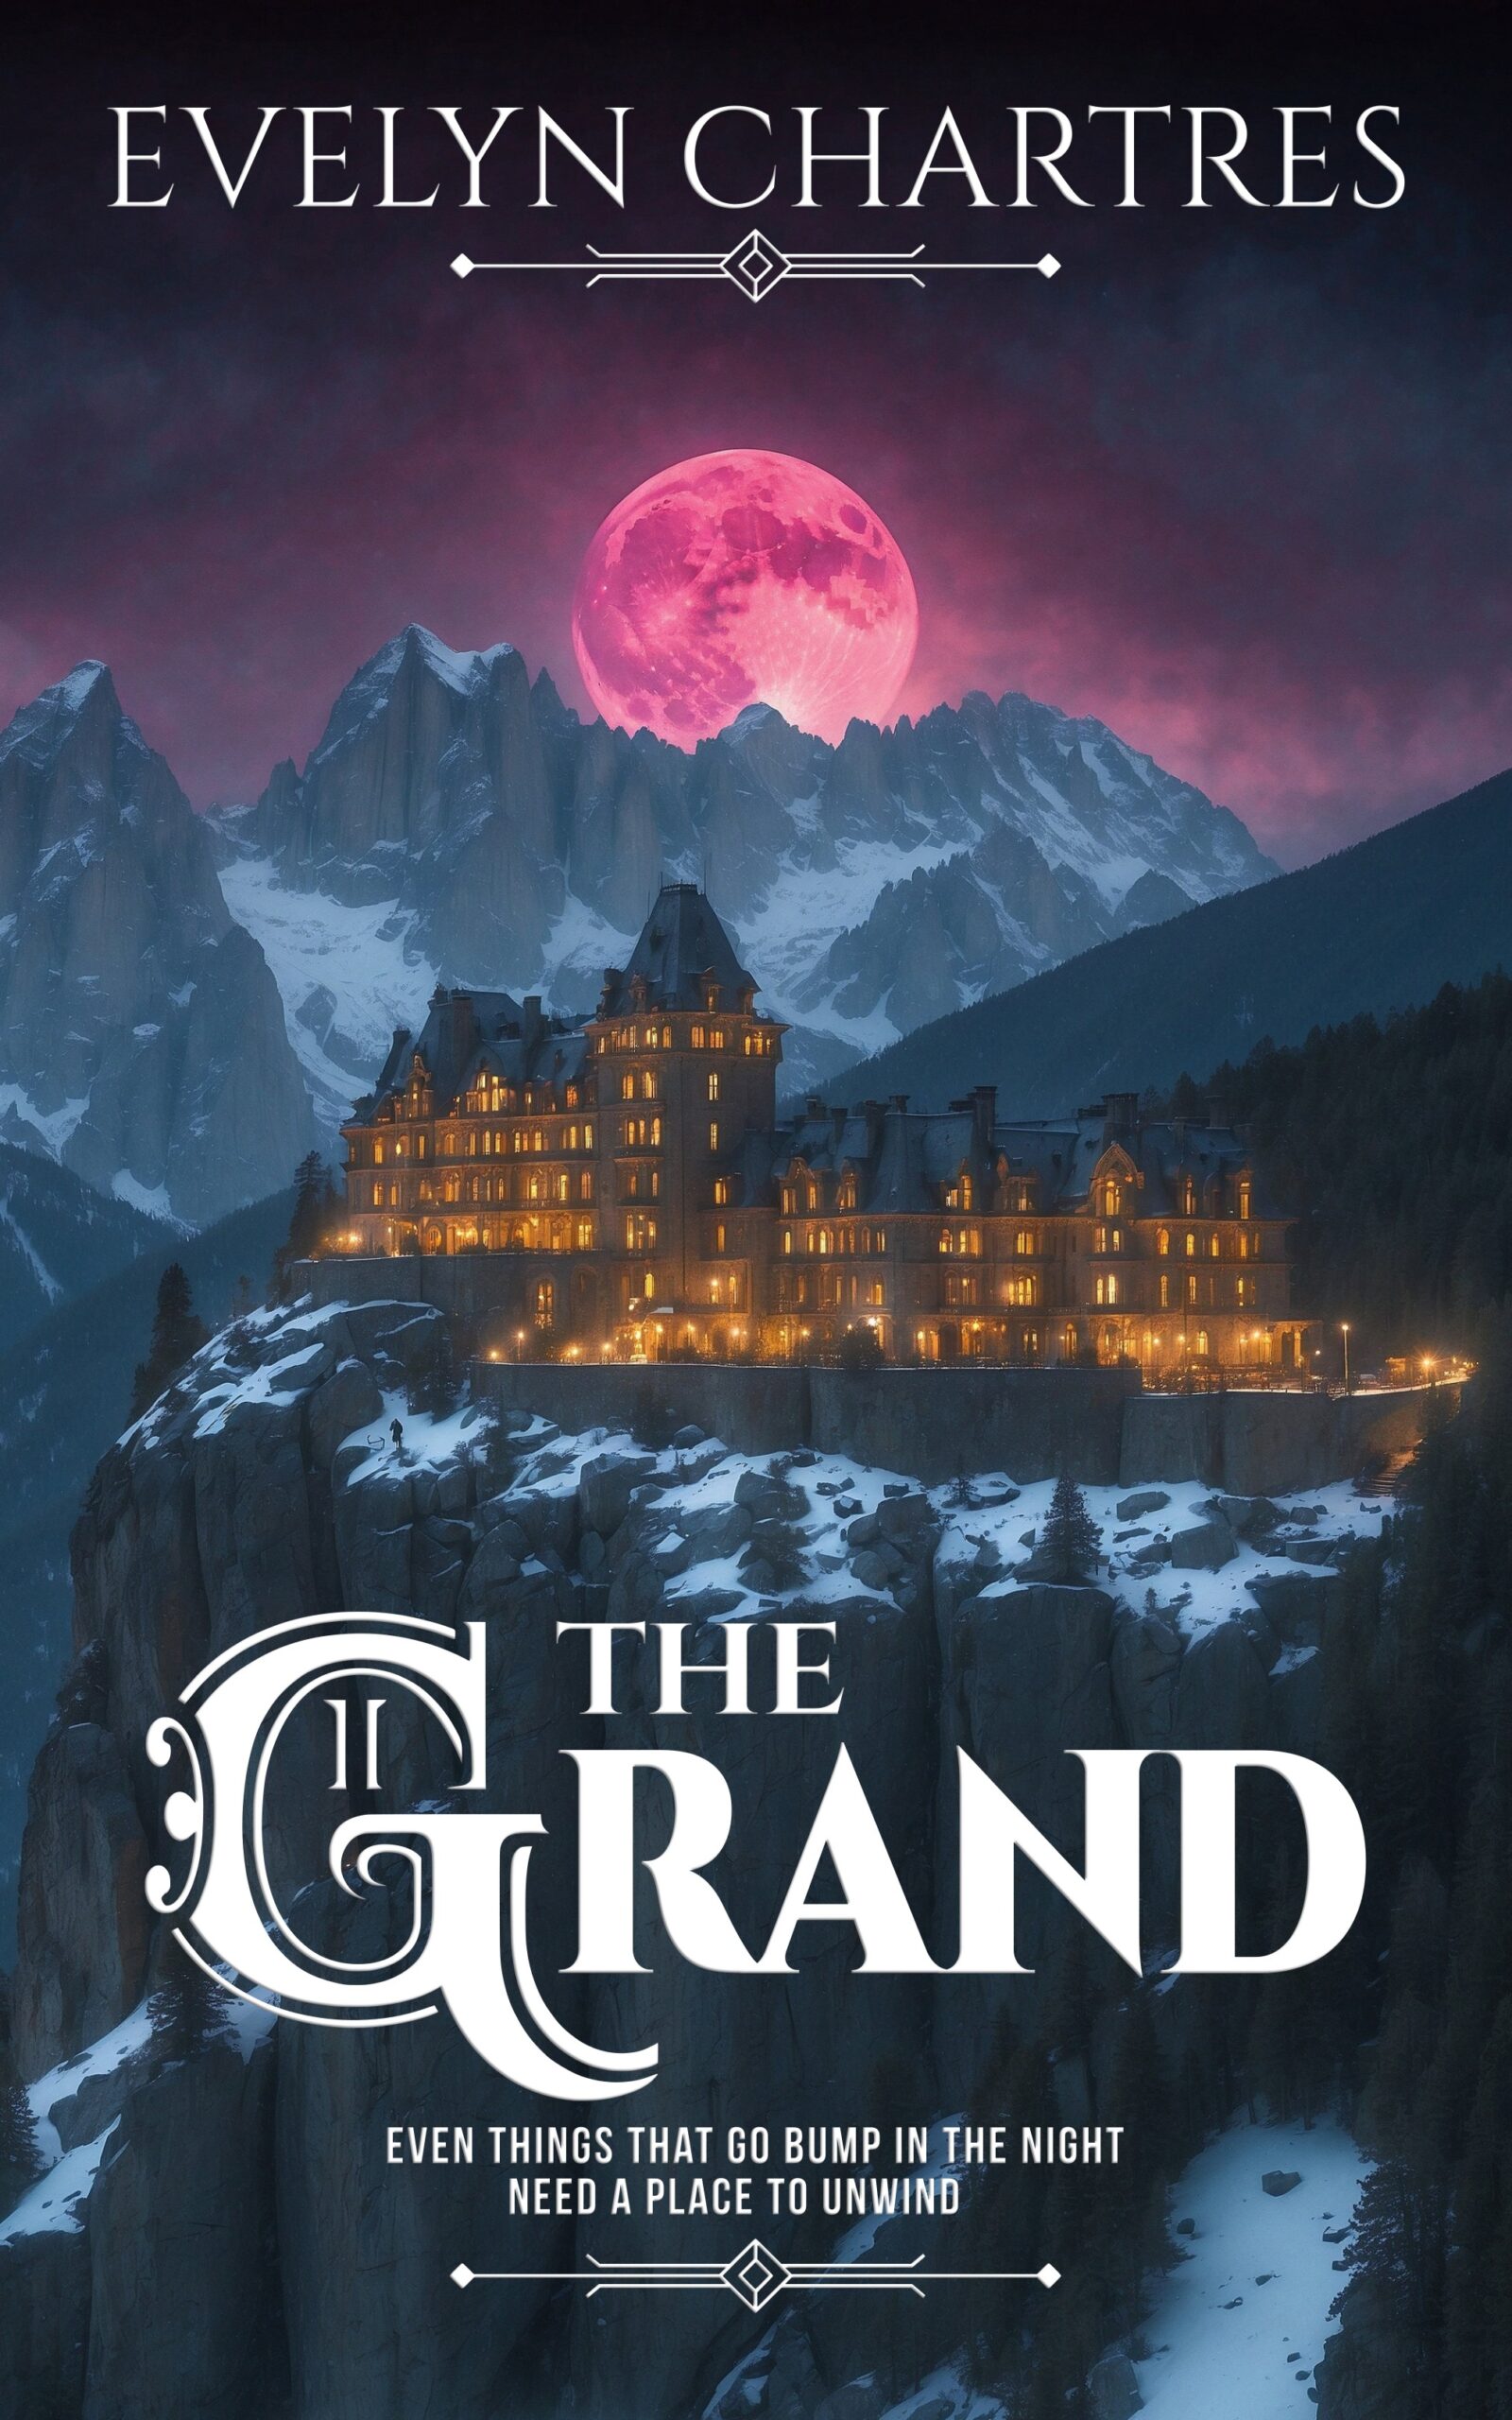 The Grand by Evelyn Chartres